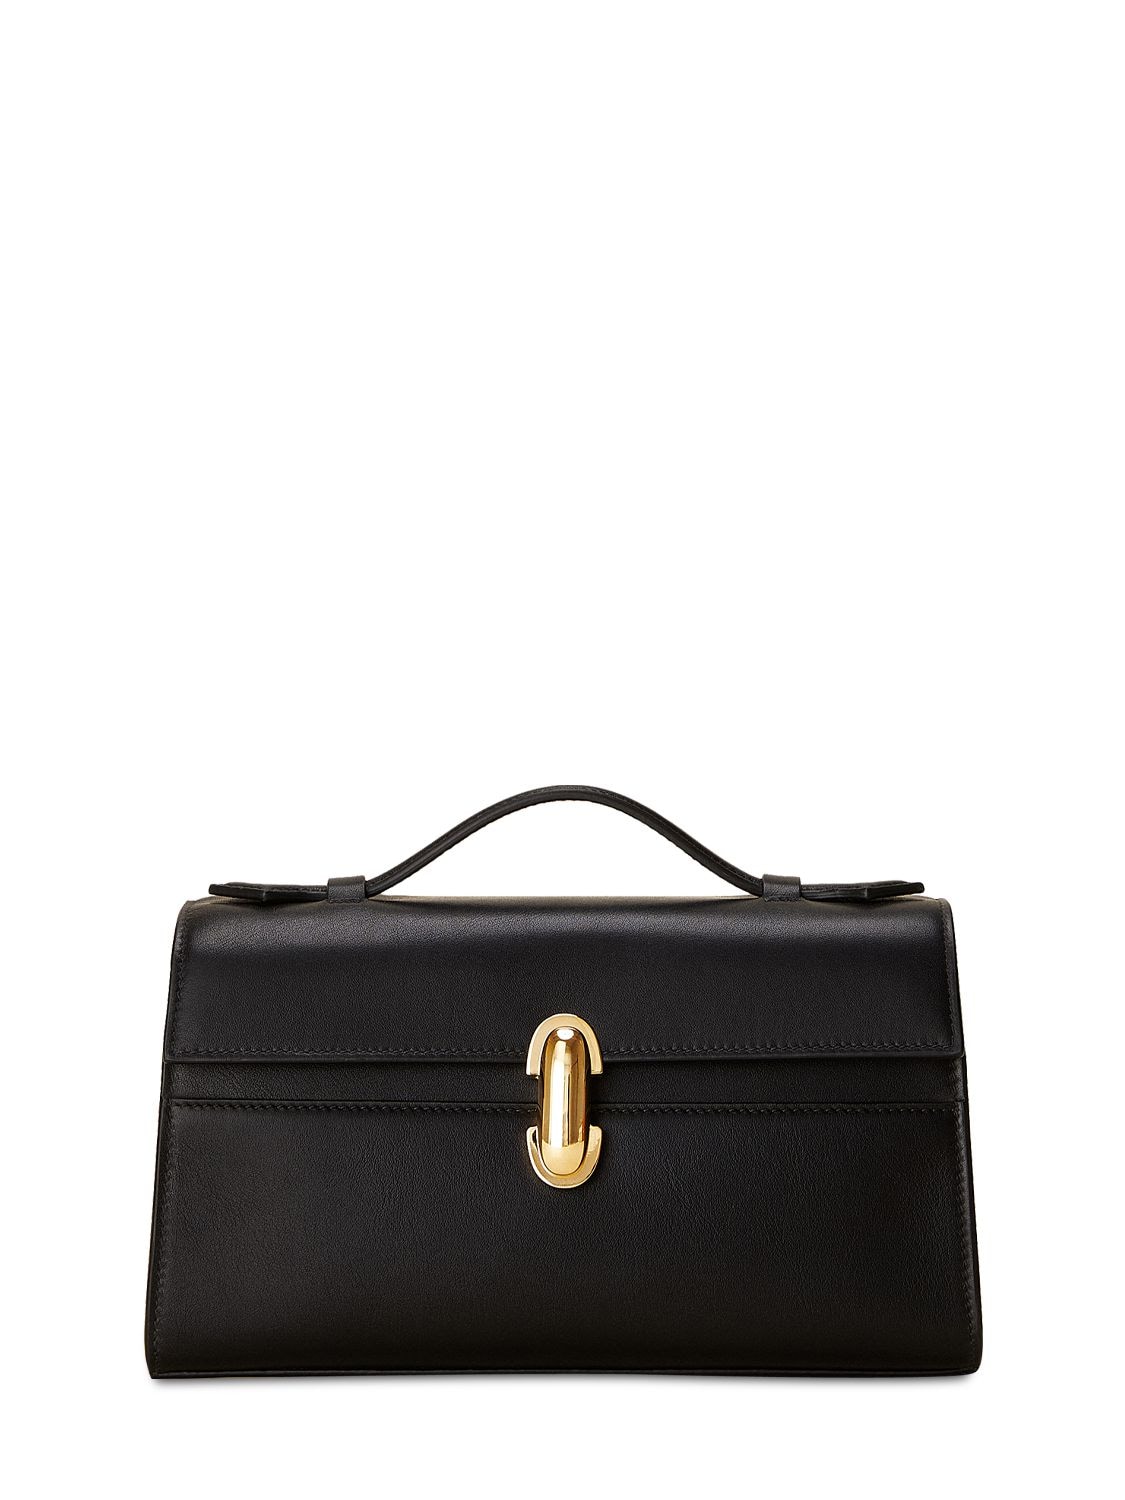 Image of The Symmetry Leather Top Handle Bag